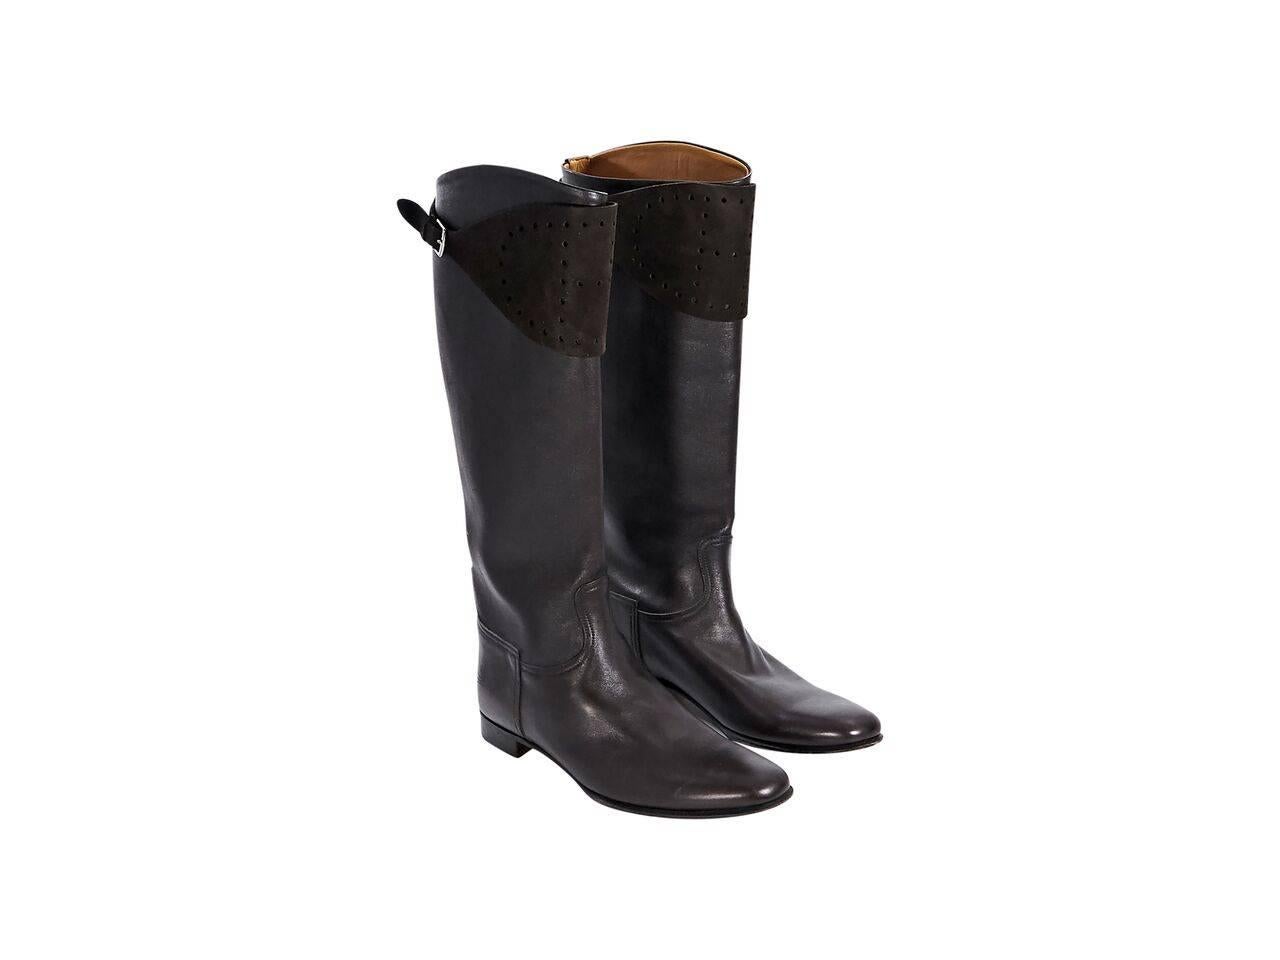 Product details:  Brown leather tall boots by Hermes.  Suede perforated shaft panel with adjustable closure.  Round toe.  
Condition: Pre-owned. Very good.
Est. Retail $ 2,385.00